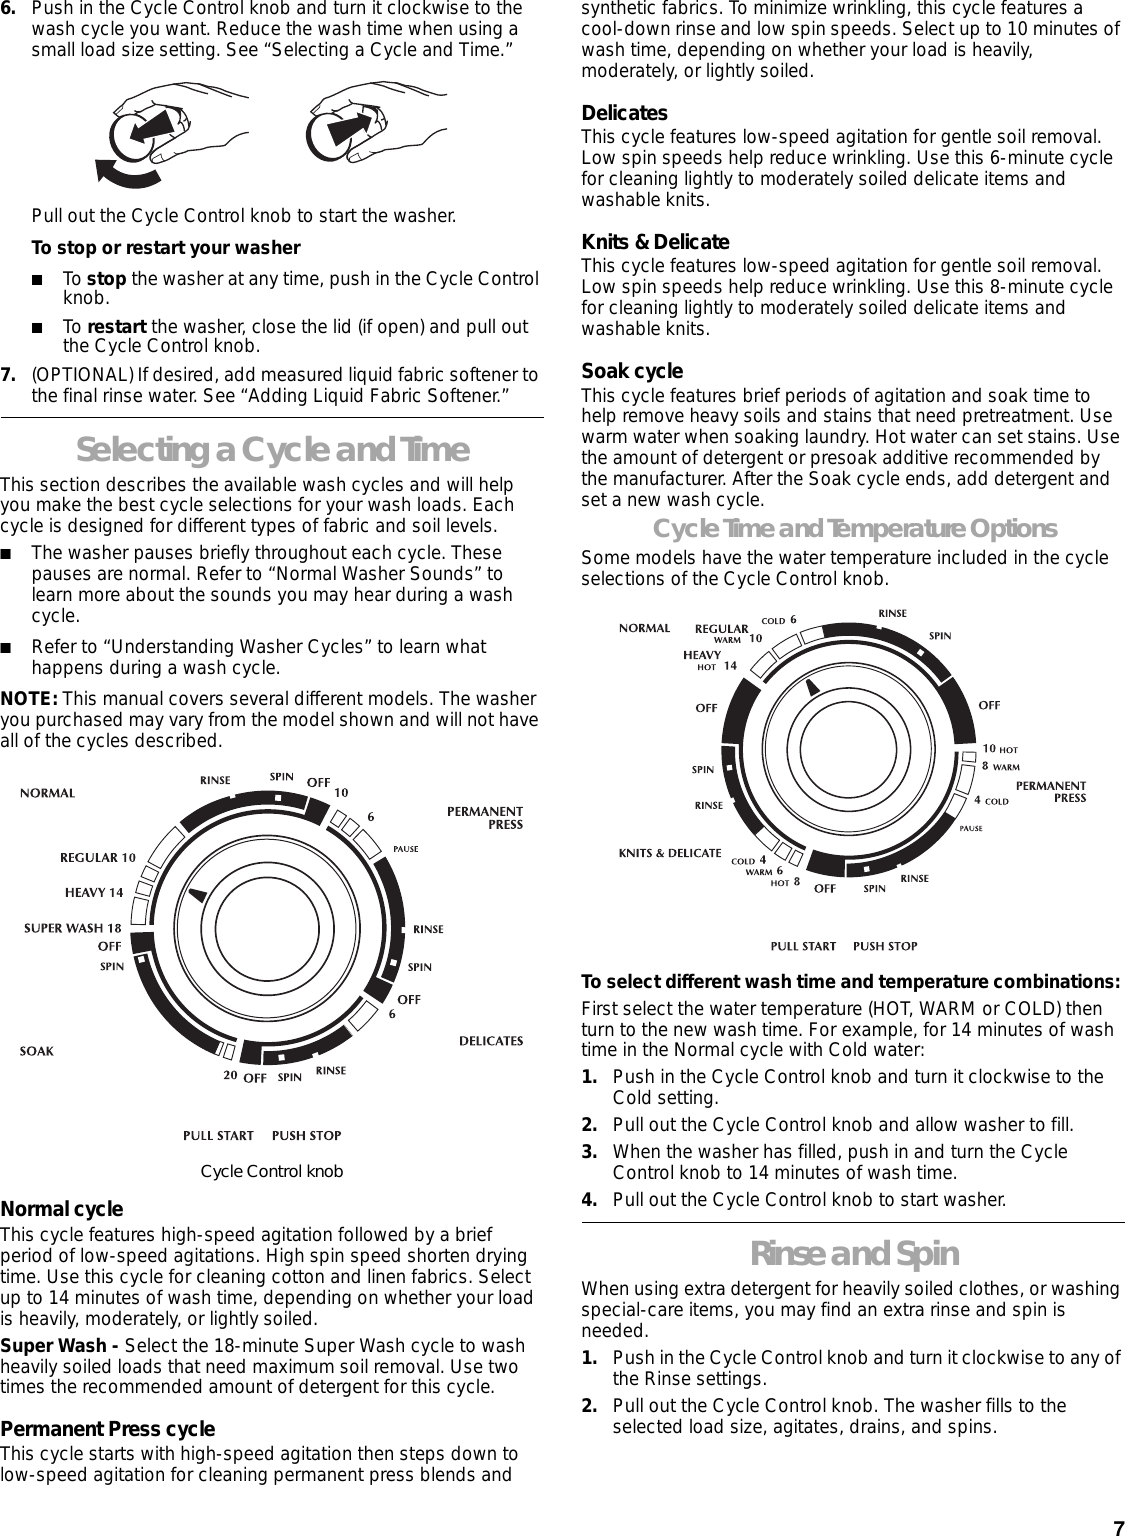 Page 7 of 12 - Whirlpool Whirlpool-Conservator-3953964-Users-Manual- Roper Cover Graphic  Whirlpool-conservator-3953964-users-manual